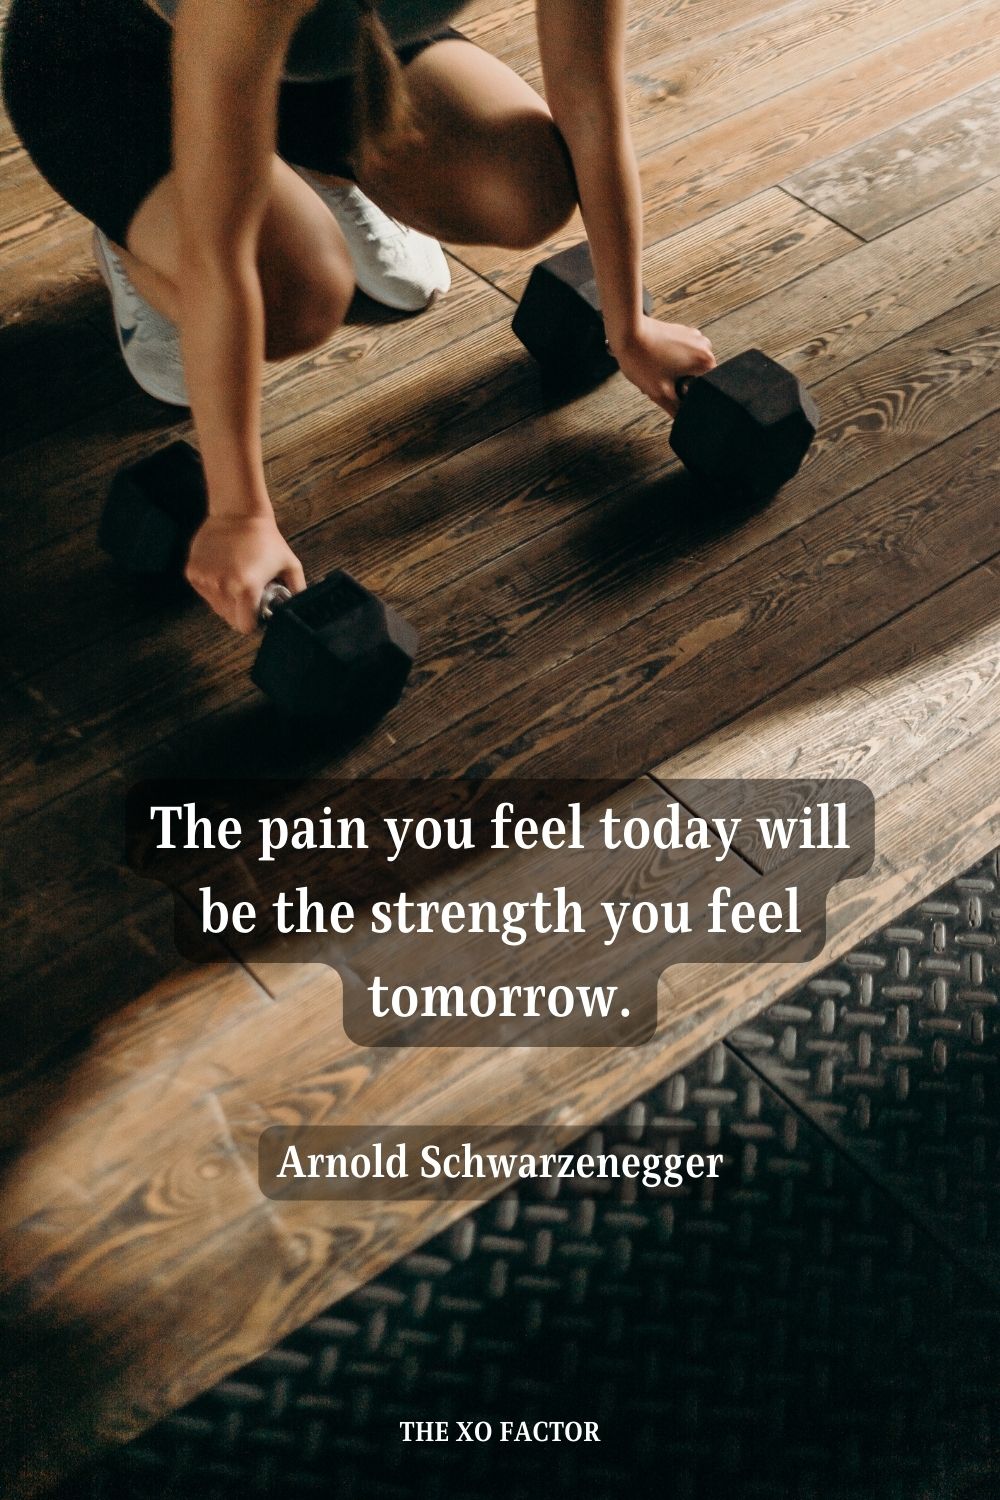 The pain you feel today will be the strength you feel tomorrow. Arnold Schwarzenegger